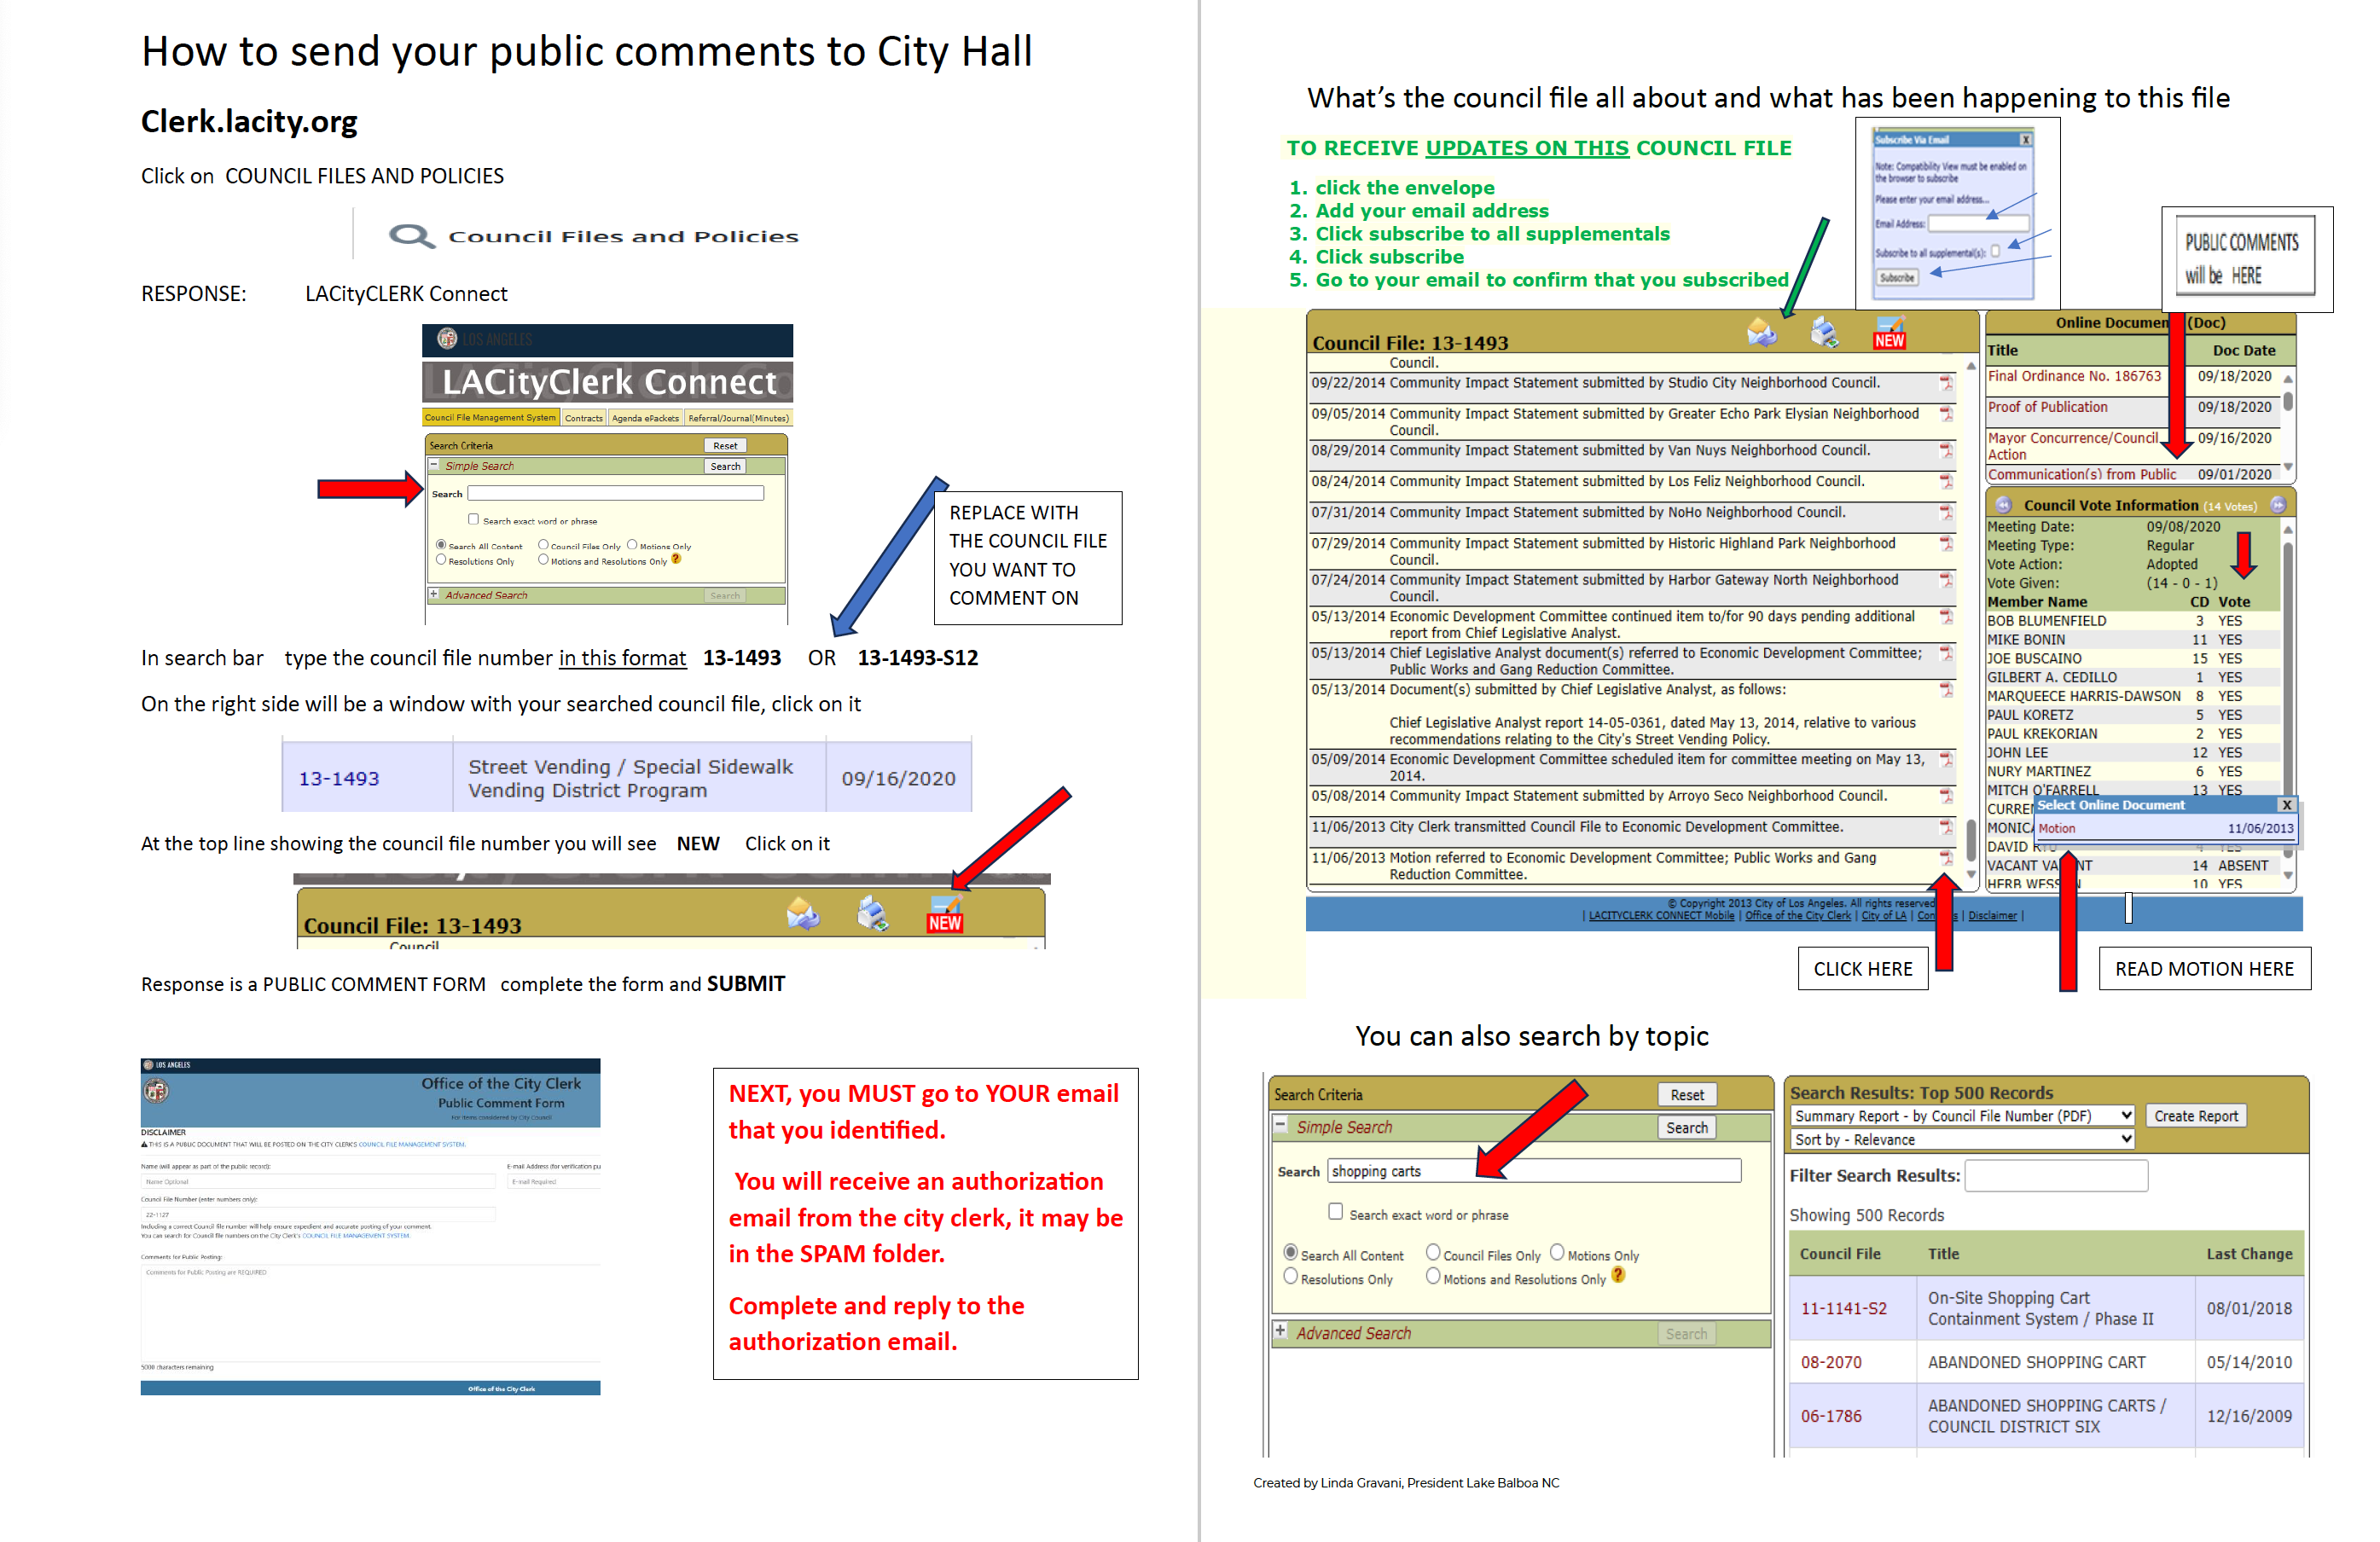 How To Submit Public Comments to the City